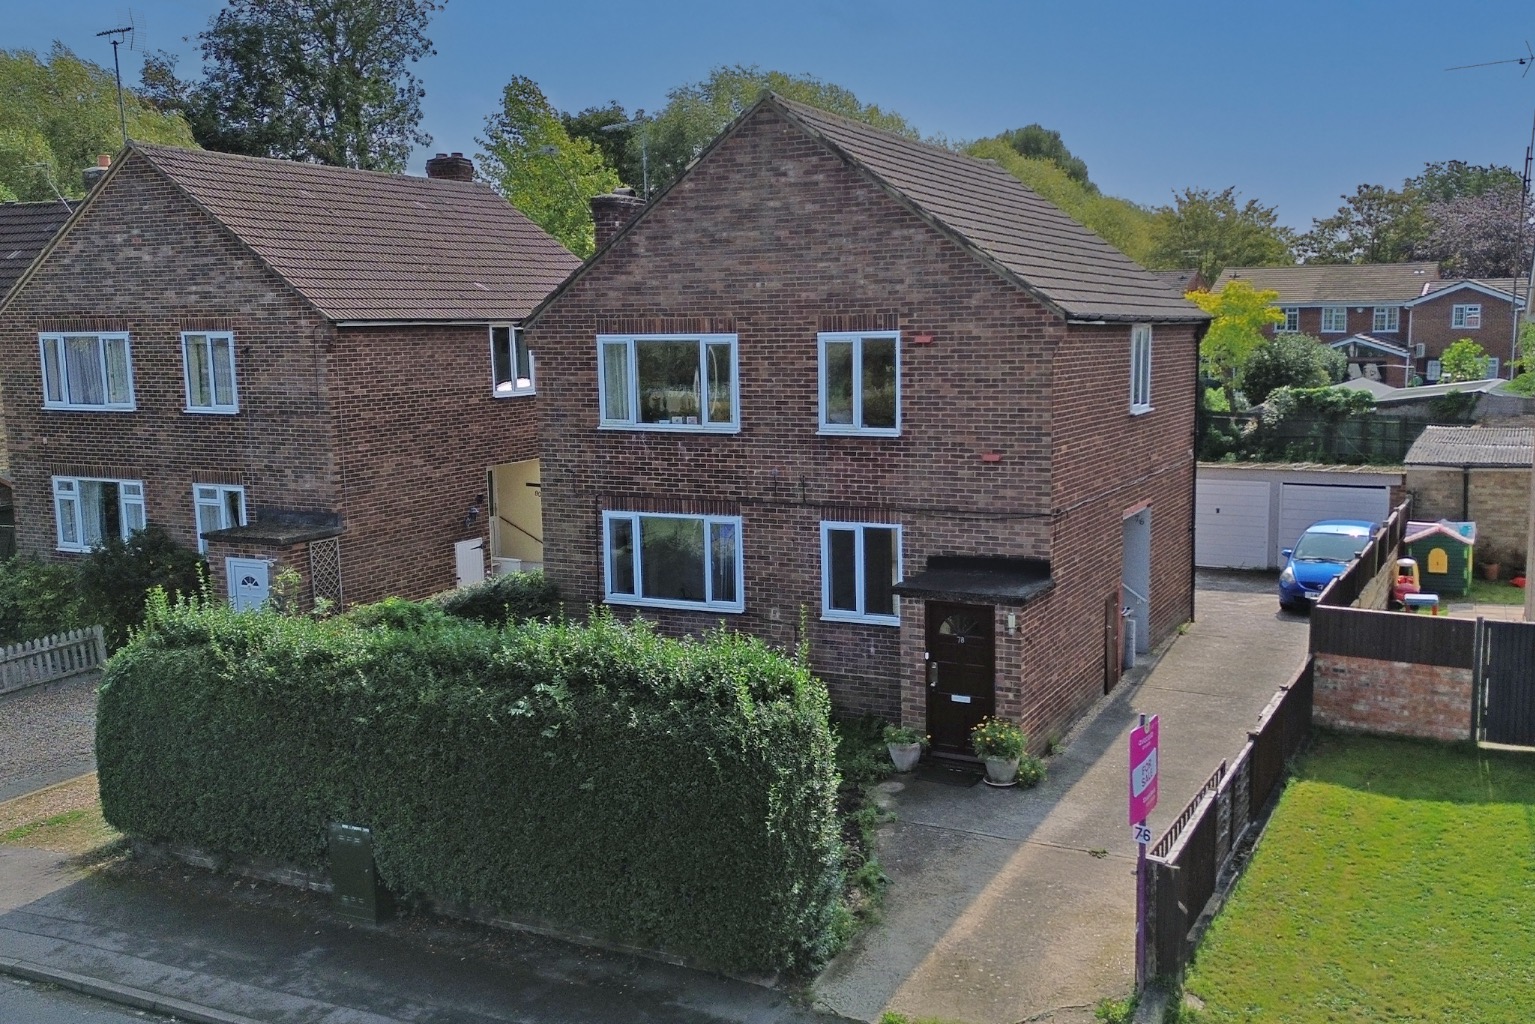 2 bed ground floor maisonette to rent in Ray Mill Road West, Maidenhead - Property Image 1